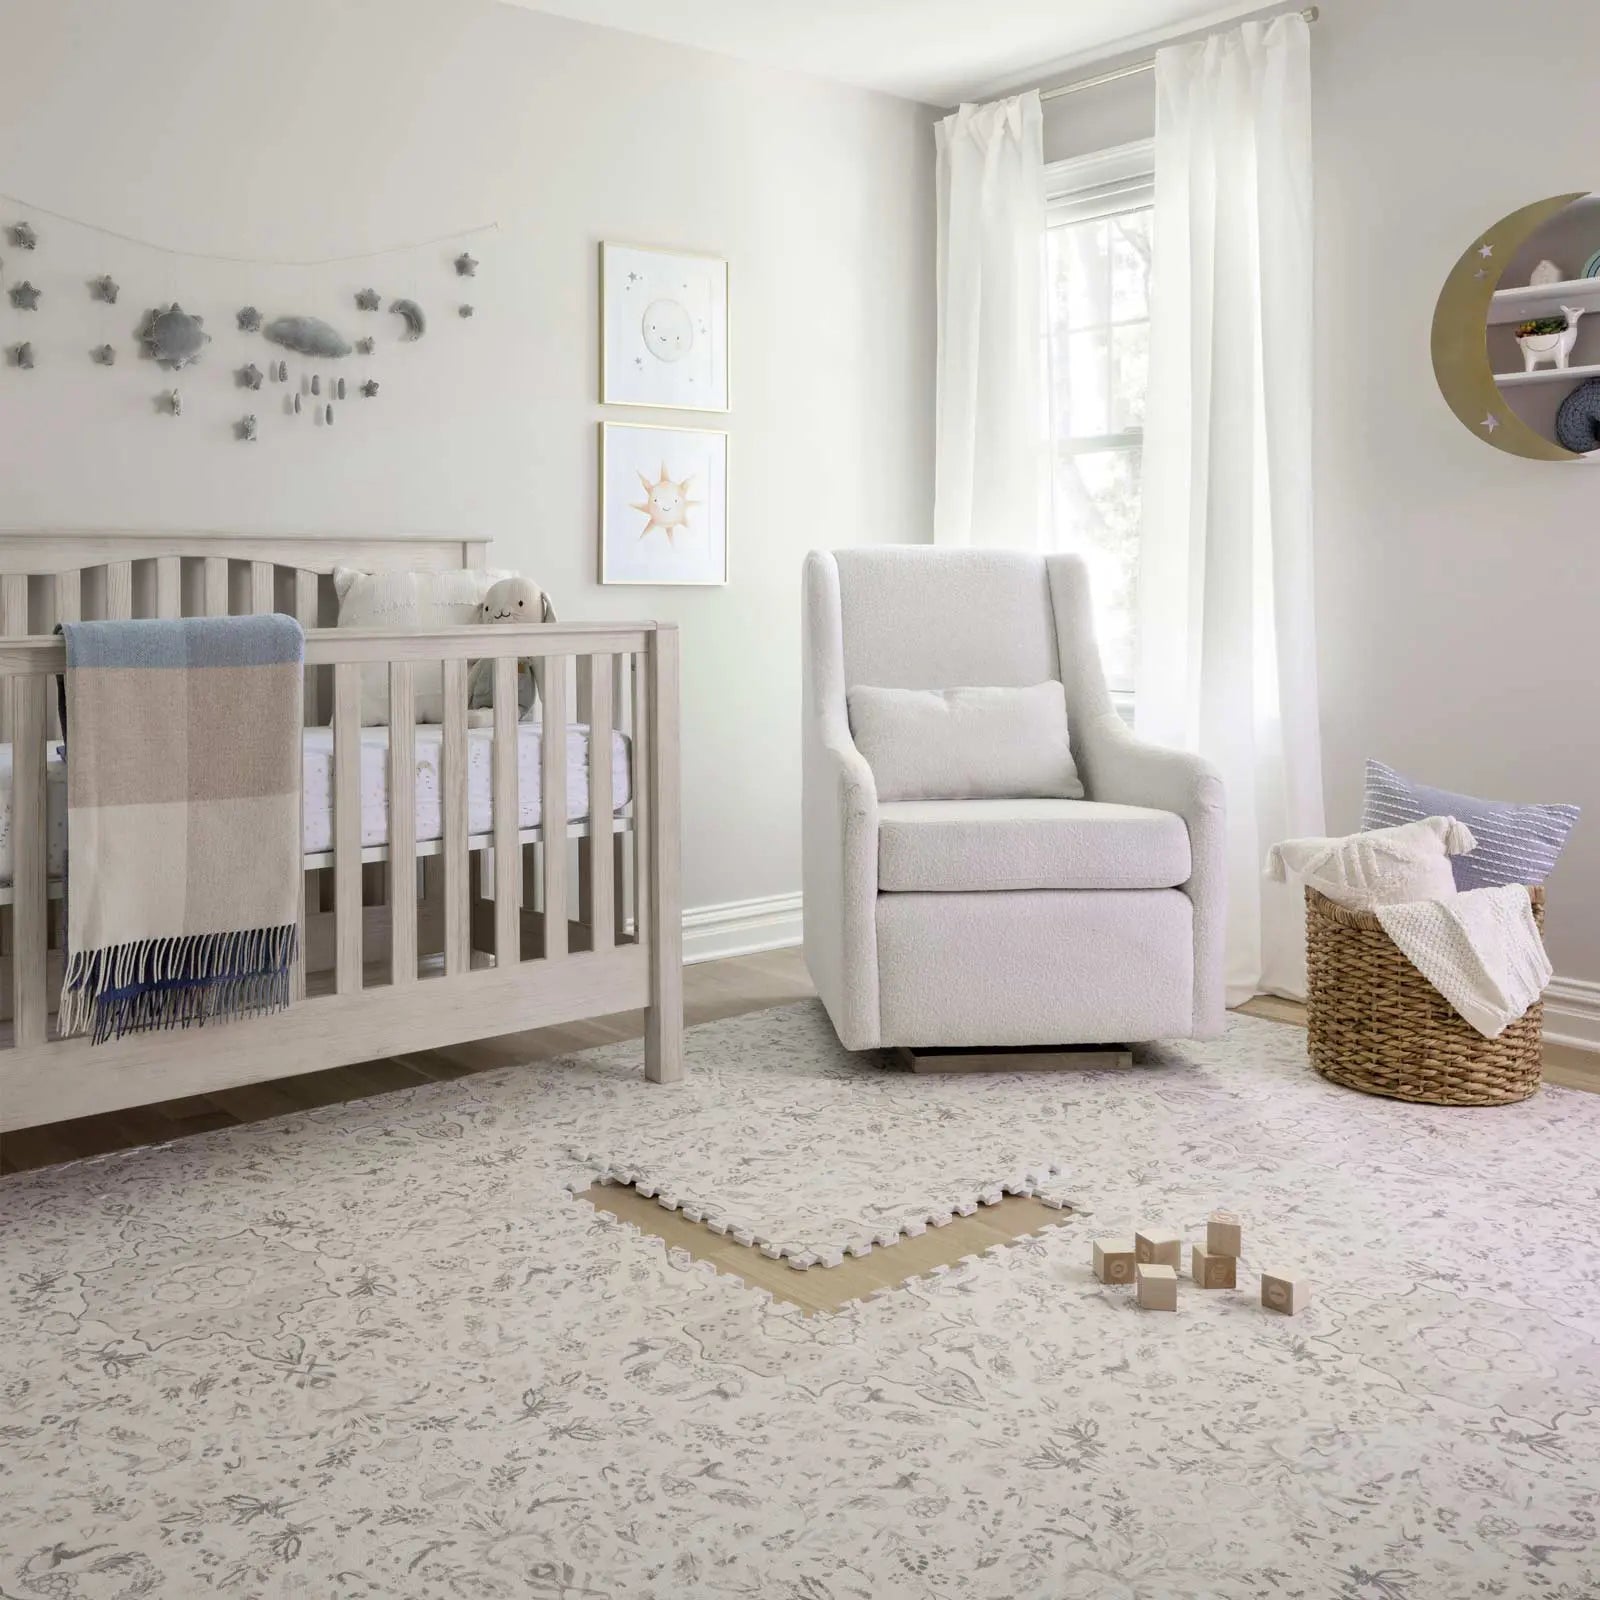 Emile latte neutral floral play mat shown in nursery with one middle tile lifted and exposed and wooden blocks on the mat